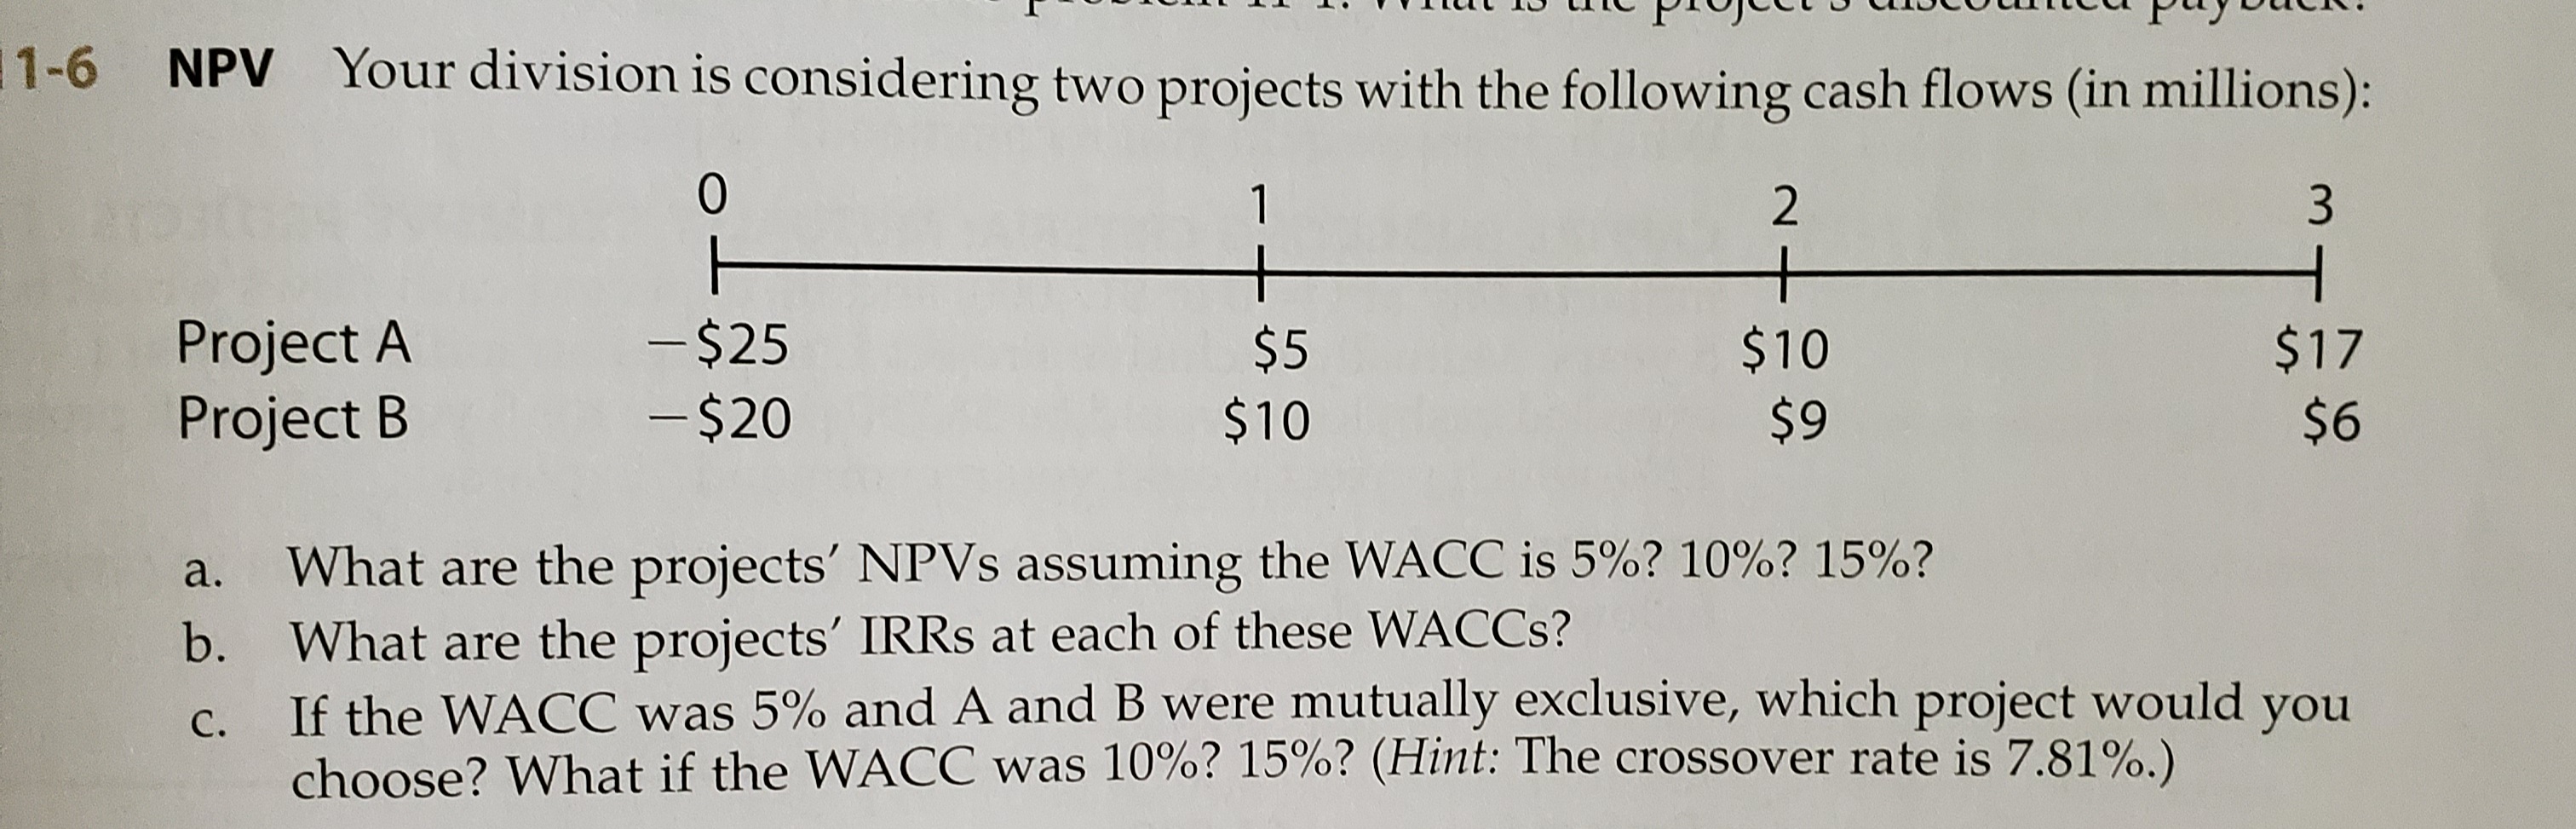 NPV Your division is considering two projects with the following cash flows (in millions):
1
2
3
+
+
Project A
Project B
- $25
-$20
$5
$10
$10
$9
$17
$6
What are the projects' NPVS assuming the WACC is 5%? 10%? 15%?
b. What are the projects' IRRS at each of these WACCS?
If the WACC was 5% and A and B were mutually exclusive, which project would you
choose? What if the W ACC was 10%? 15%? (Hint: The crossover rate is 7.81%.)
a.
С.
